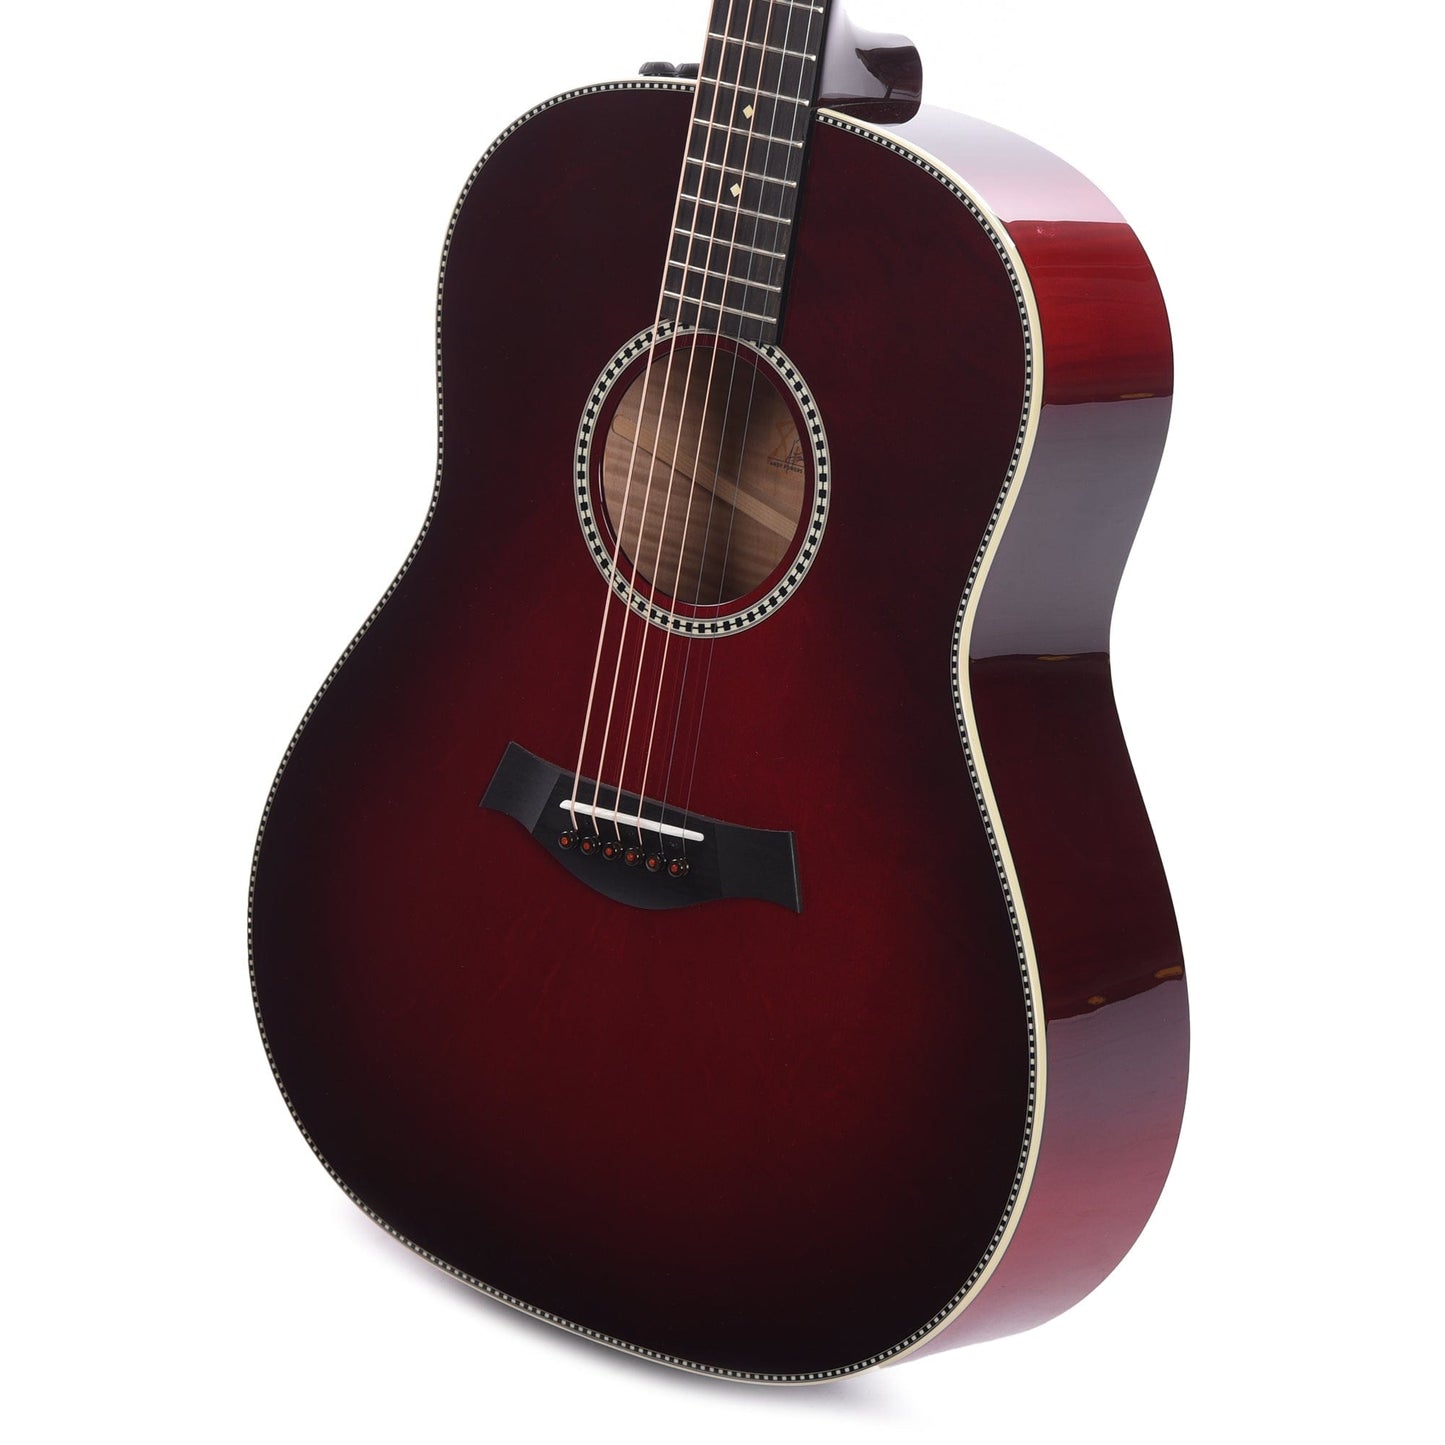 Taylor Custom "Catch" 2023 #011 Grand Pacific Maple Bearclaw Sitka/Figured Big Leaf Maple Ruby Redburst Acoustic Guitars / OM and Auditorium